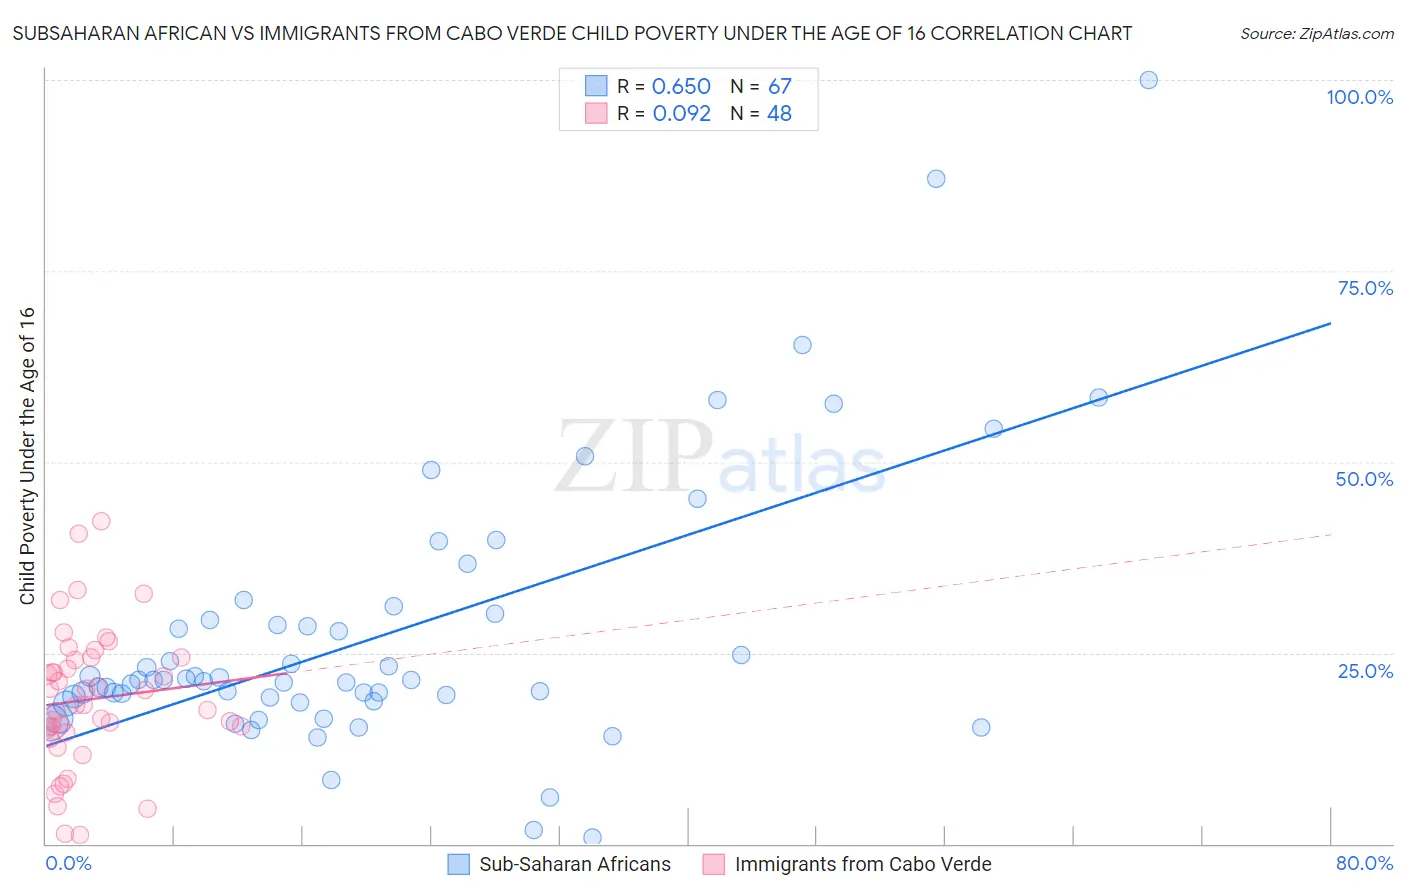 Subsaharan African vs Immigrants from Cabo Verde Child Poverty Under the Age of 16